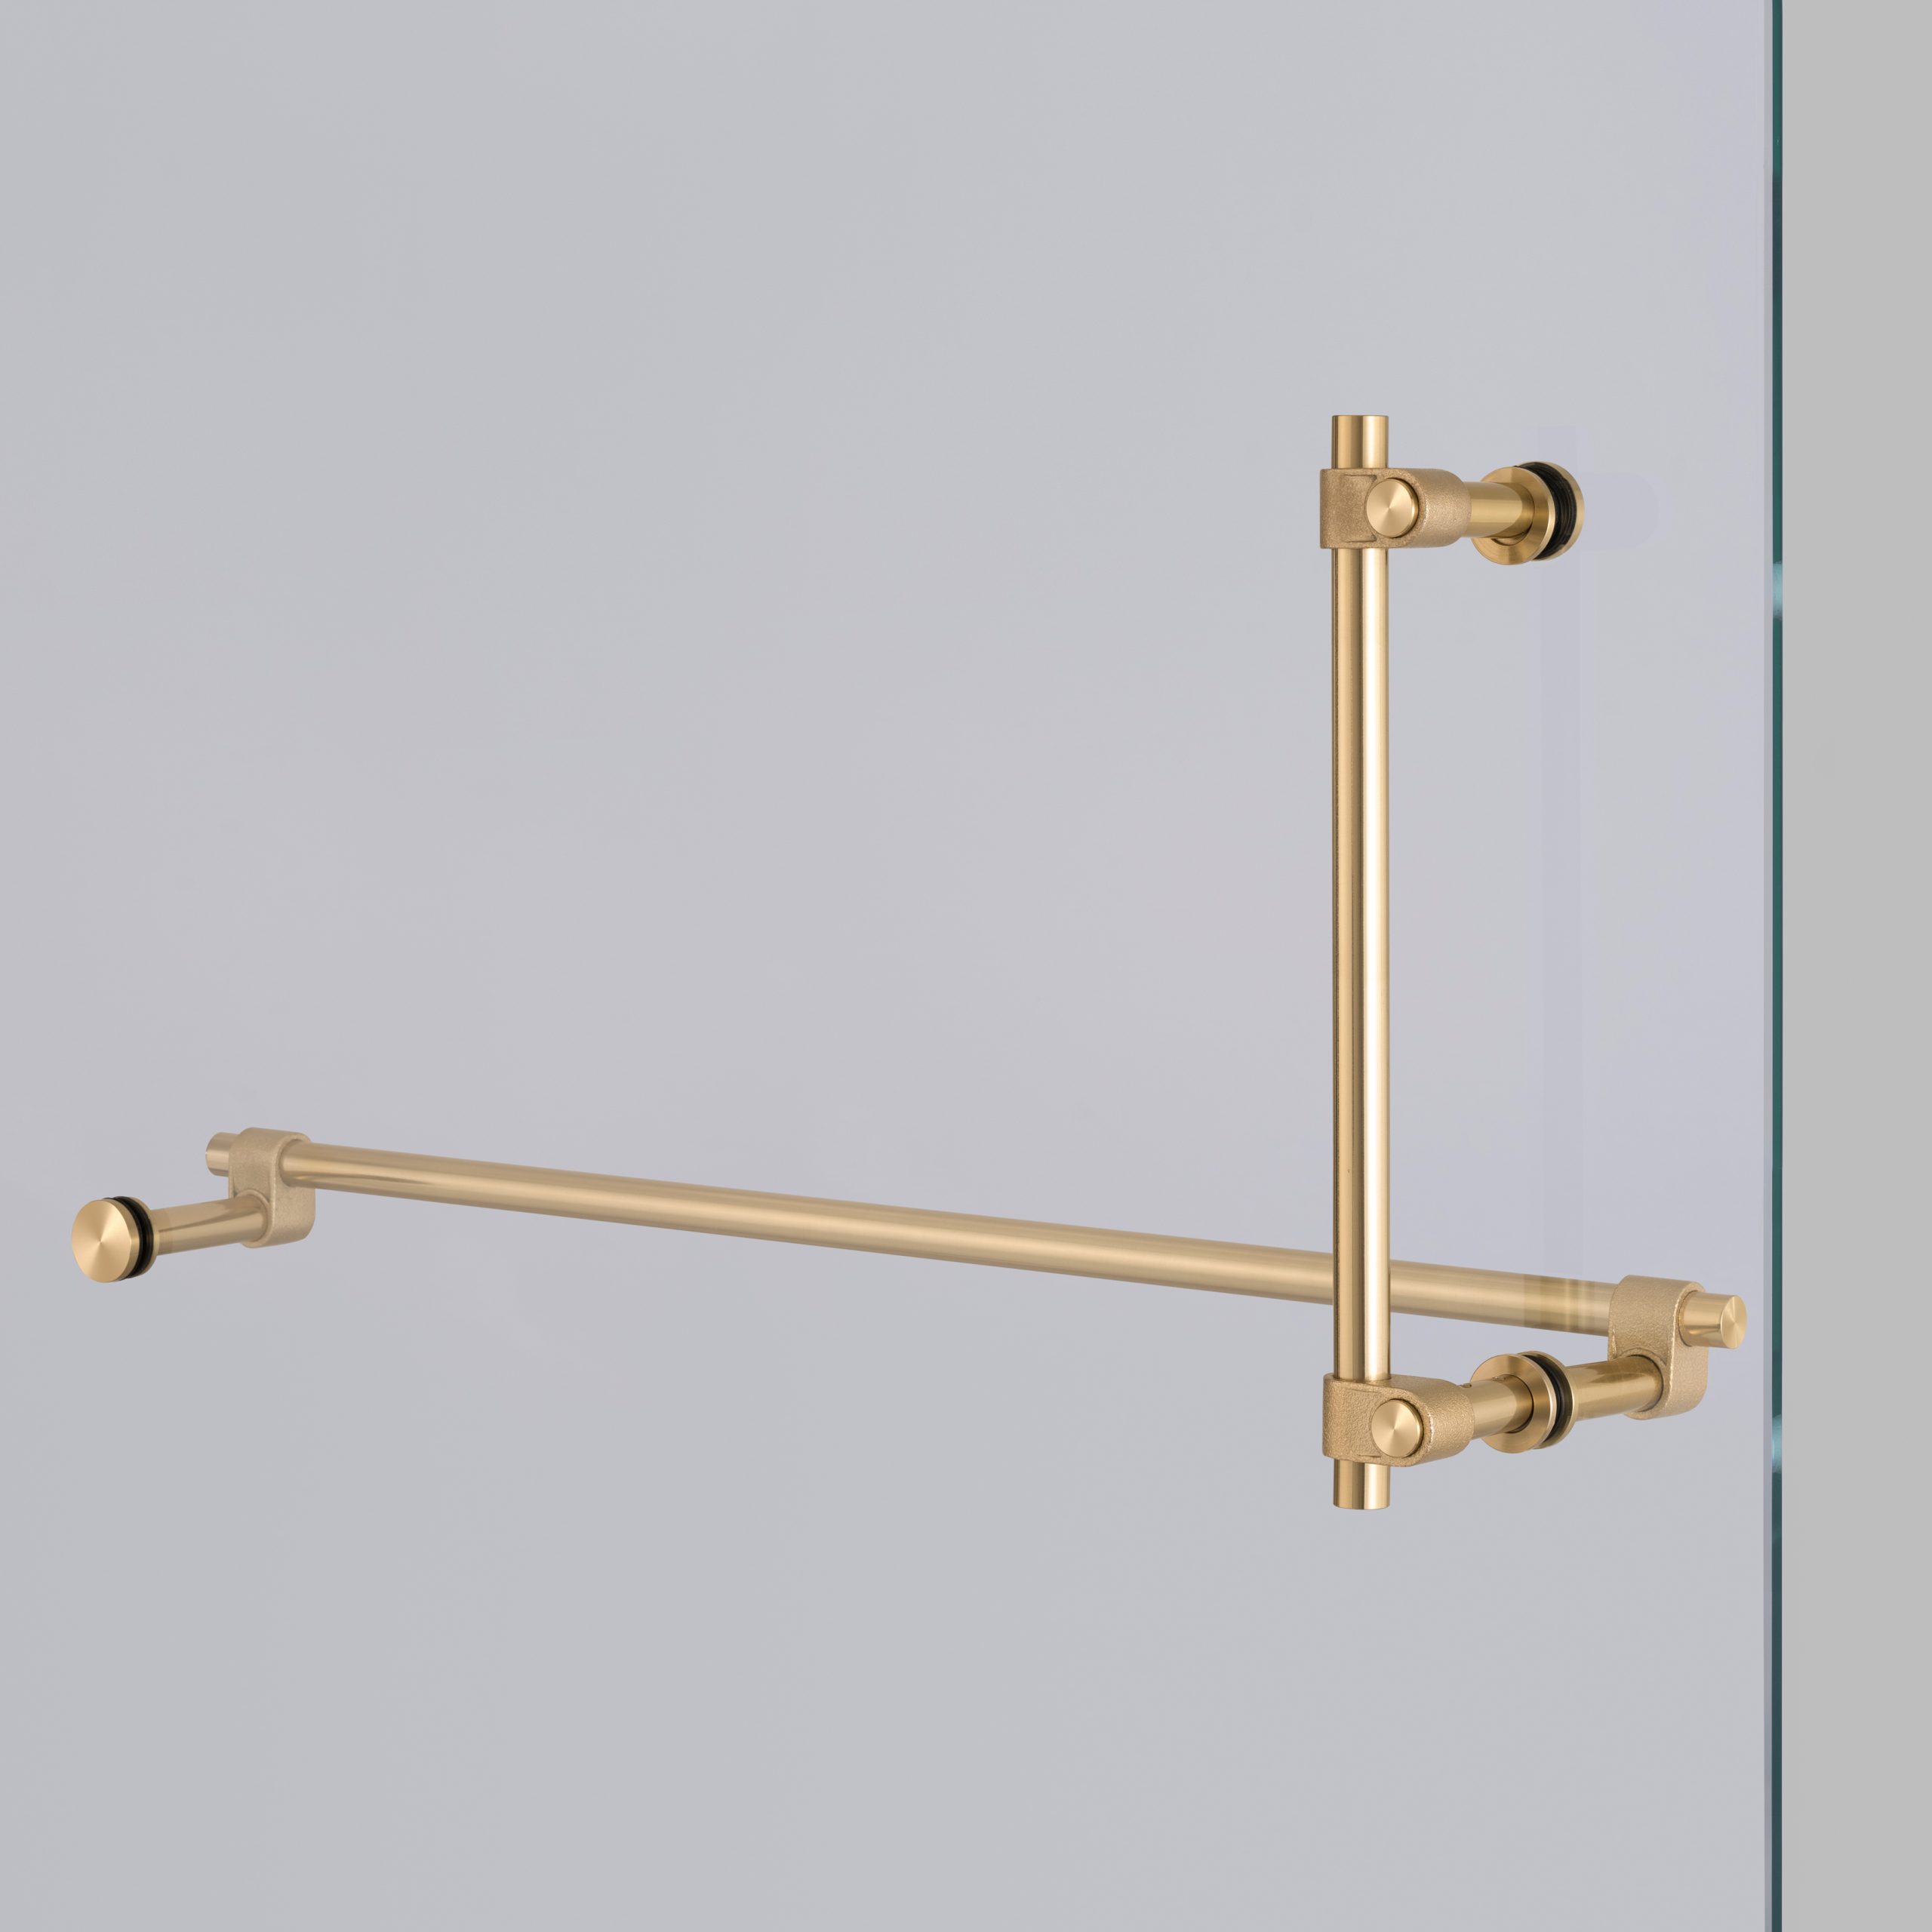 https://www.busterandpunch.com/wp-content/uploads/product/BP_Cast_Towel_Rail_and_Pull_Bar_Brass_A1_Web-scaled.jpg